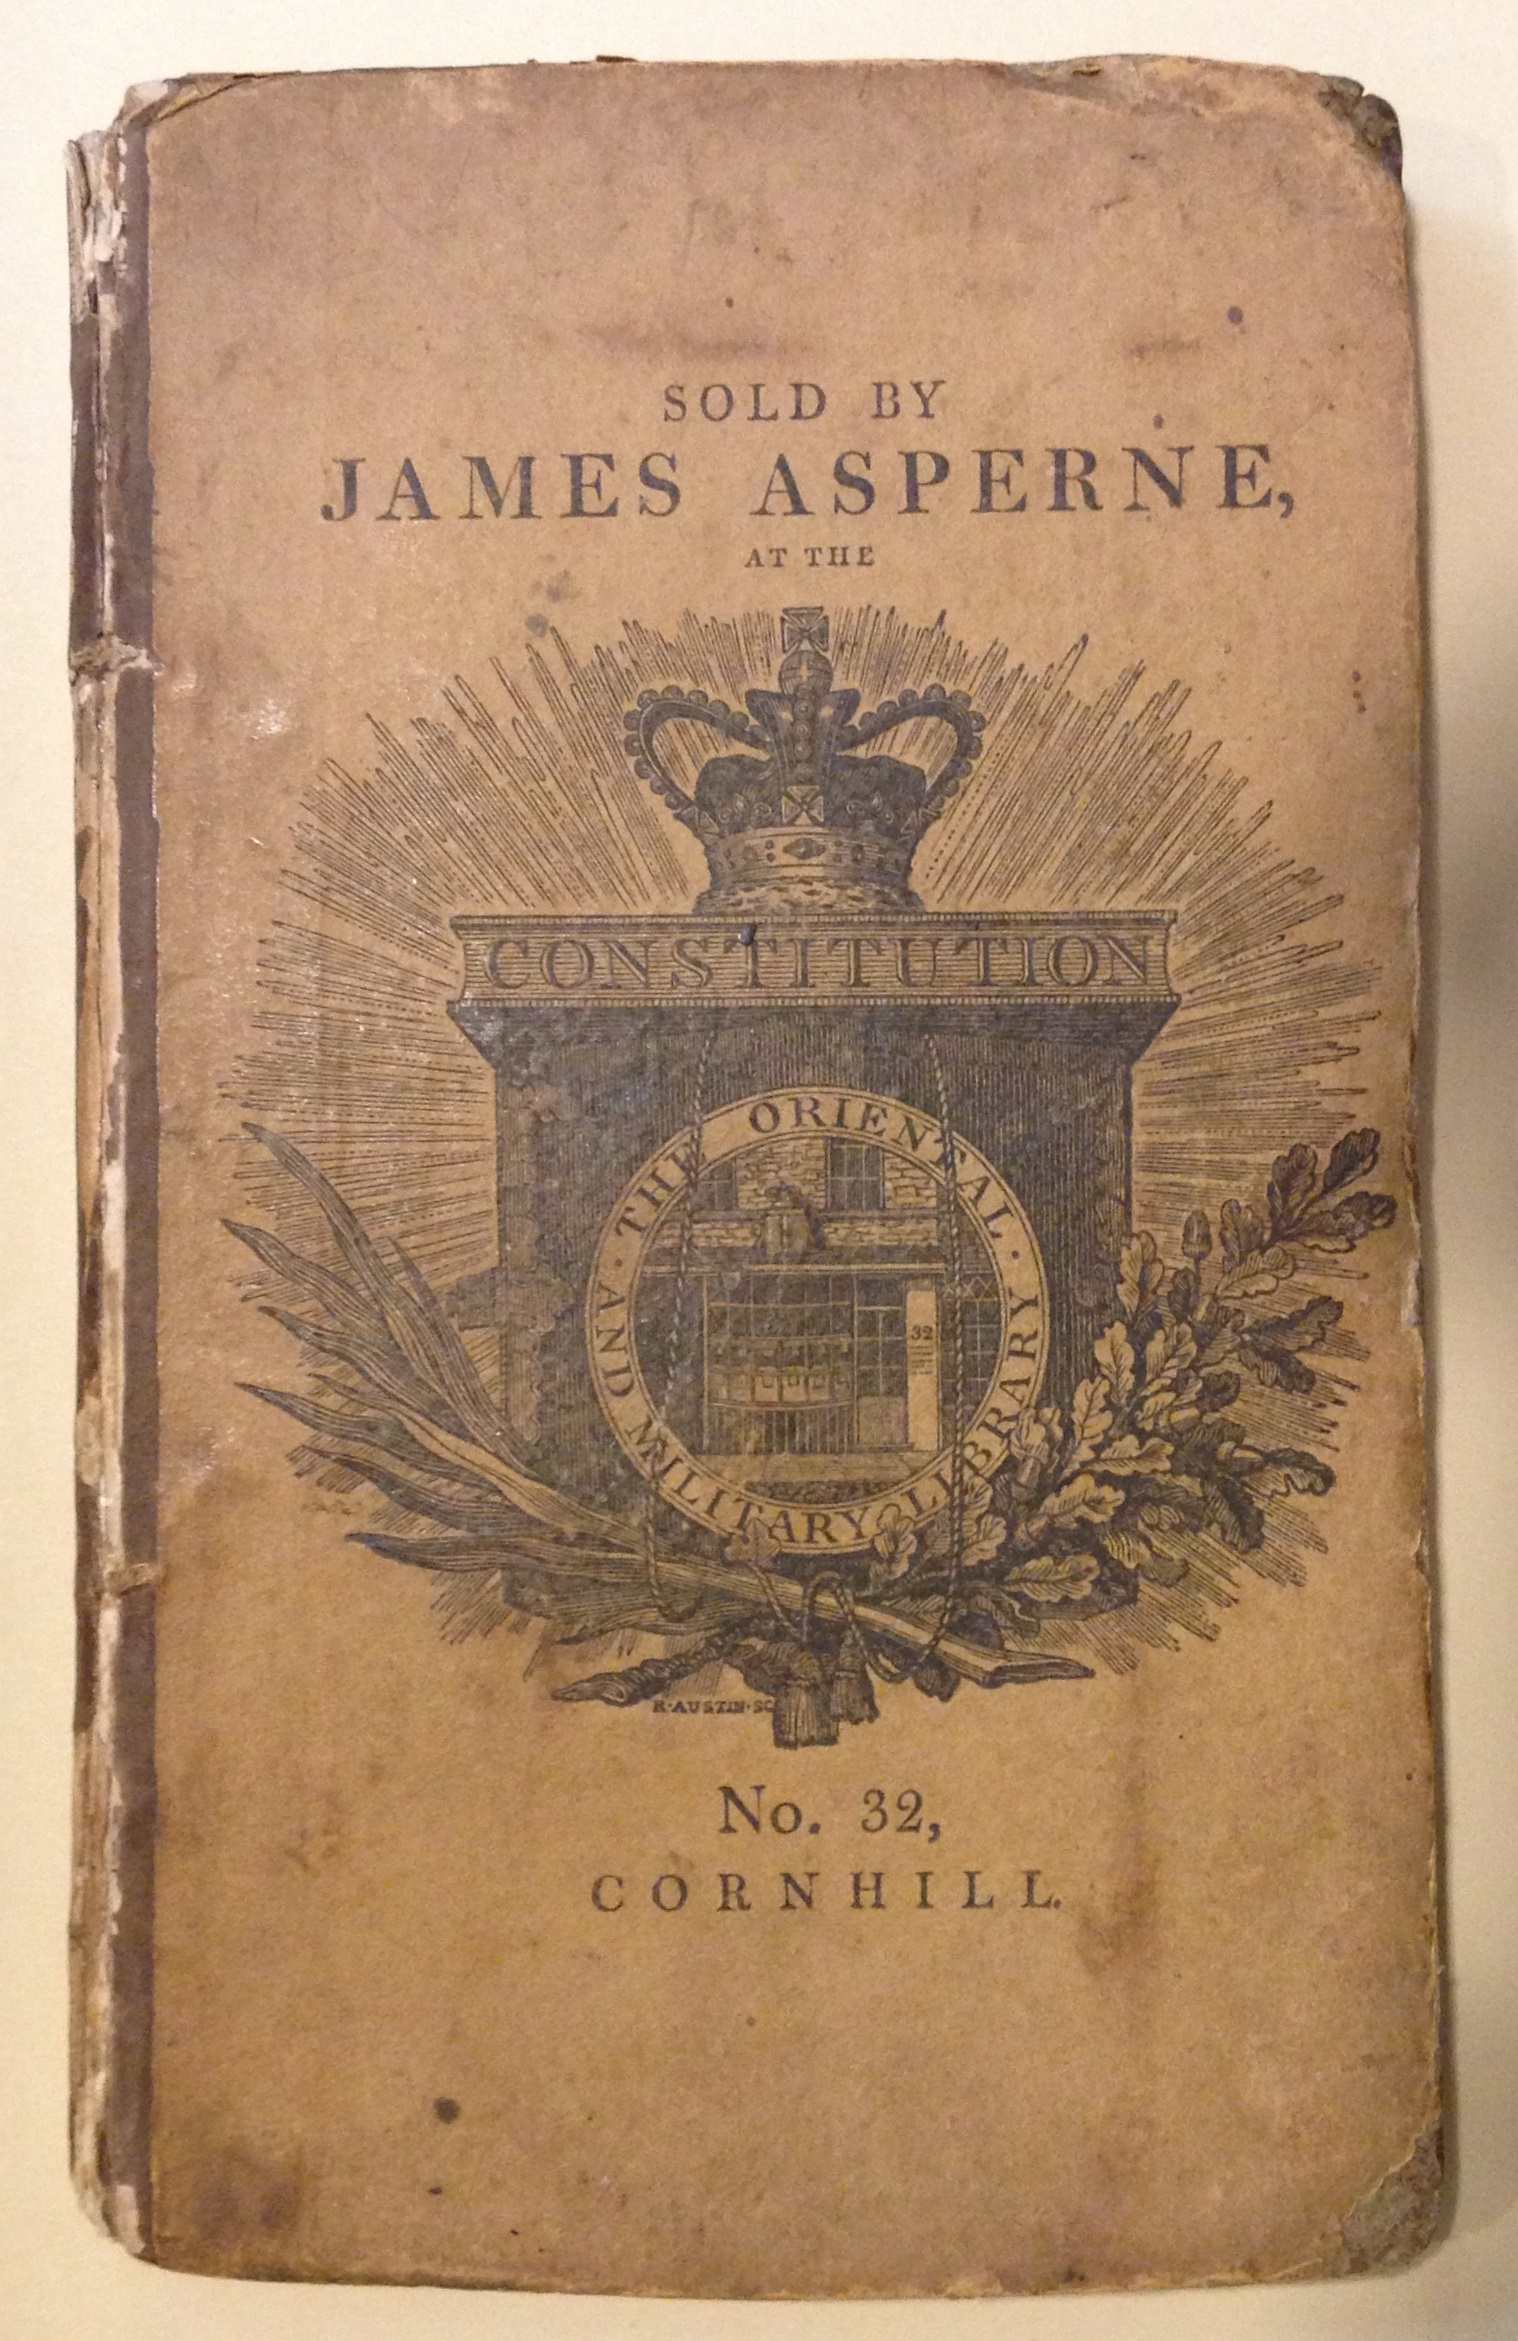 An unusual London bookseller's retail binding, ca. 1806, on a copy of Robert Bloomfield's Wild flowers; or, pastoral and local poetry (London: Printed for Vernor, Hood, and Sharpe, and Longman, Hurst, Rees, and Orme, 1806). The front board consists of a printed advertisement for bookseller James Asperne; the binding also bears Asperne's bookseller's label on the rear pastedown.     (PR 4149 .B6 W5 1806)